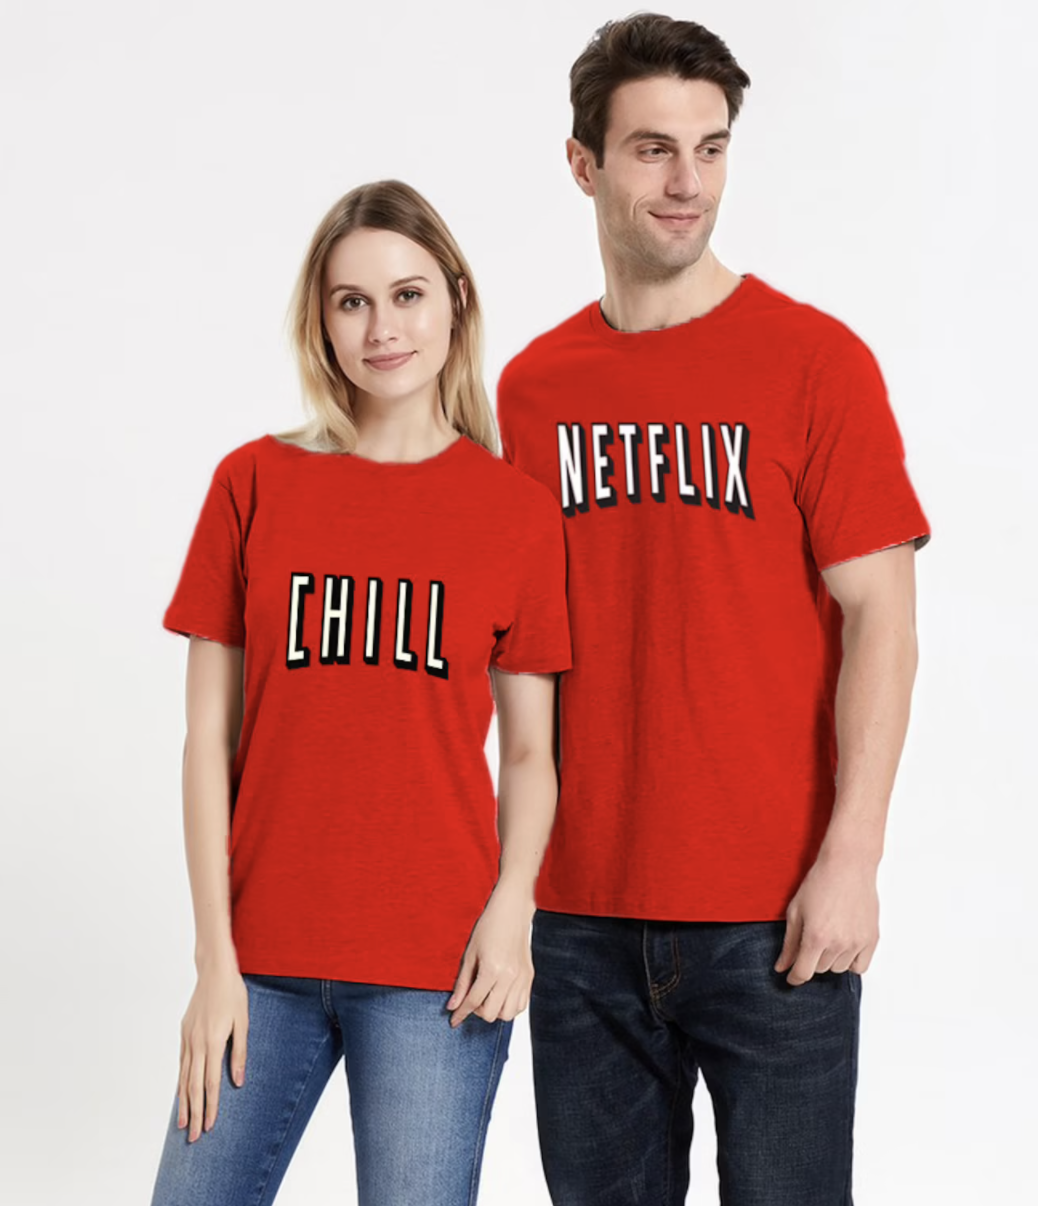 people in shirts that say &quot;netflix and chill&quot;